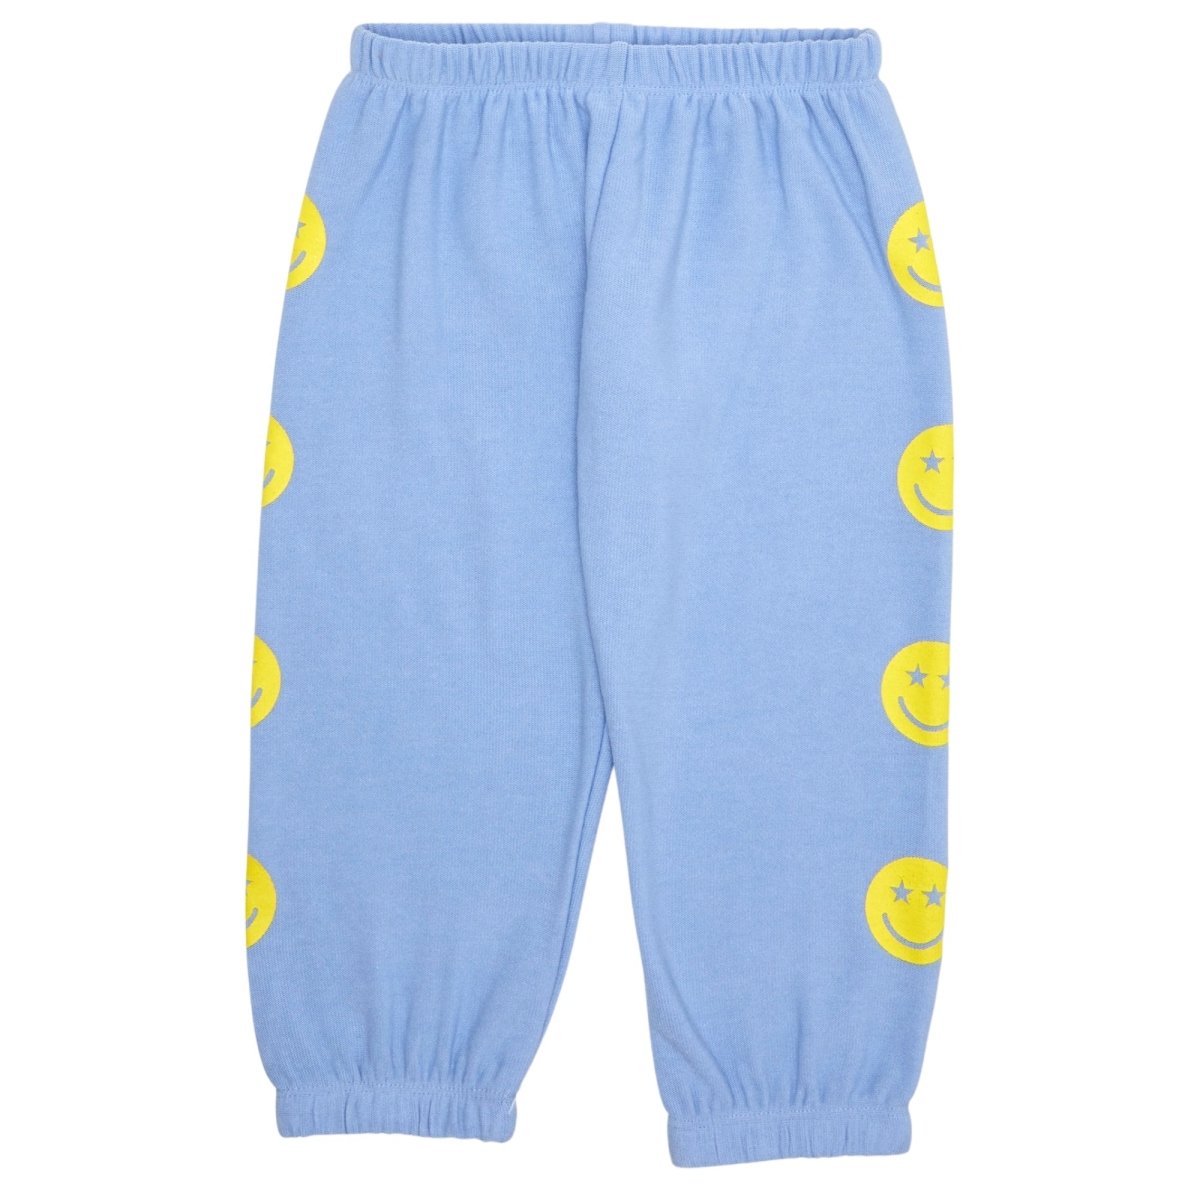 SMILEY FACE SWEATPANTS - CHASER KIDS